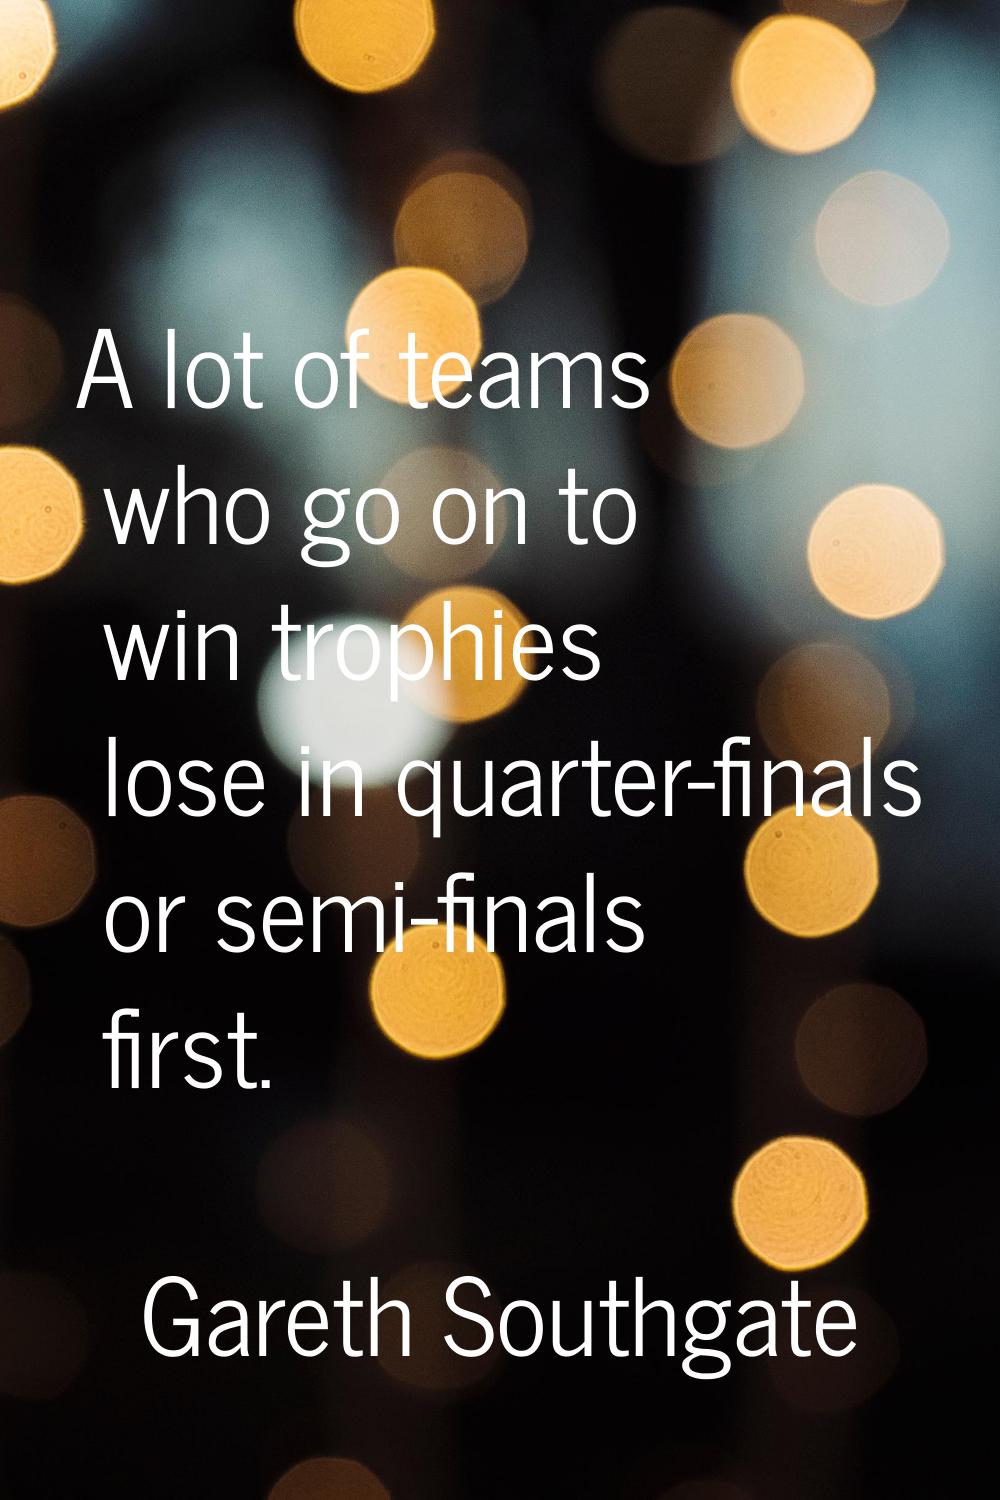 A lot of teams who go on to win trophies lose in quarter-finals or semi-finals first.